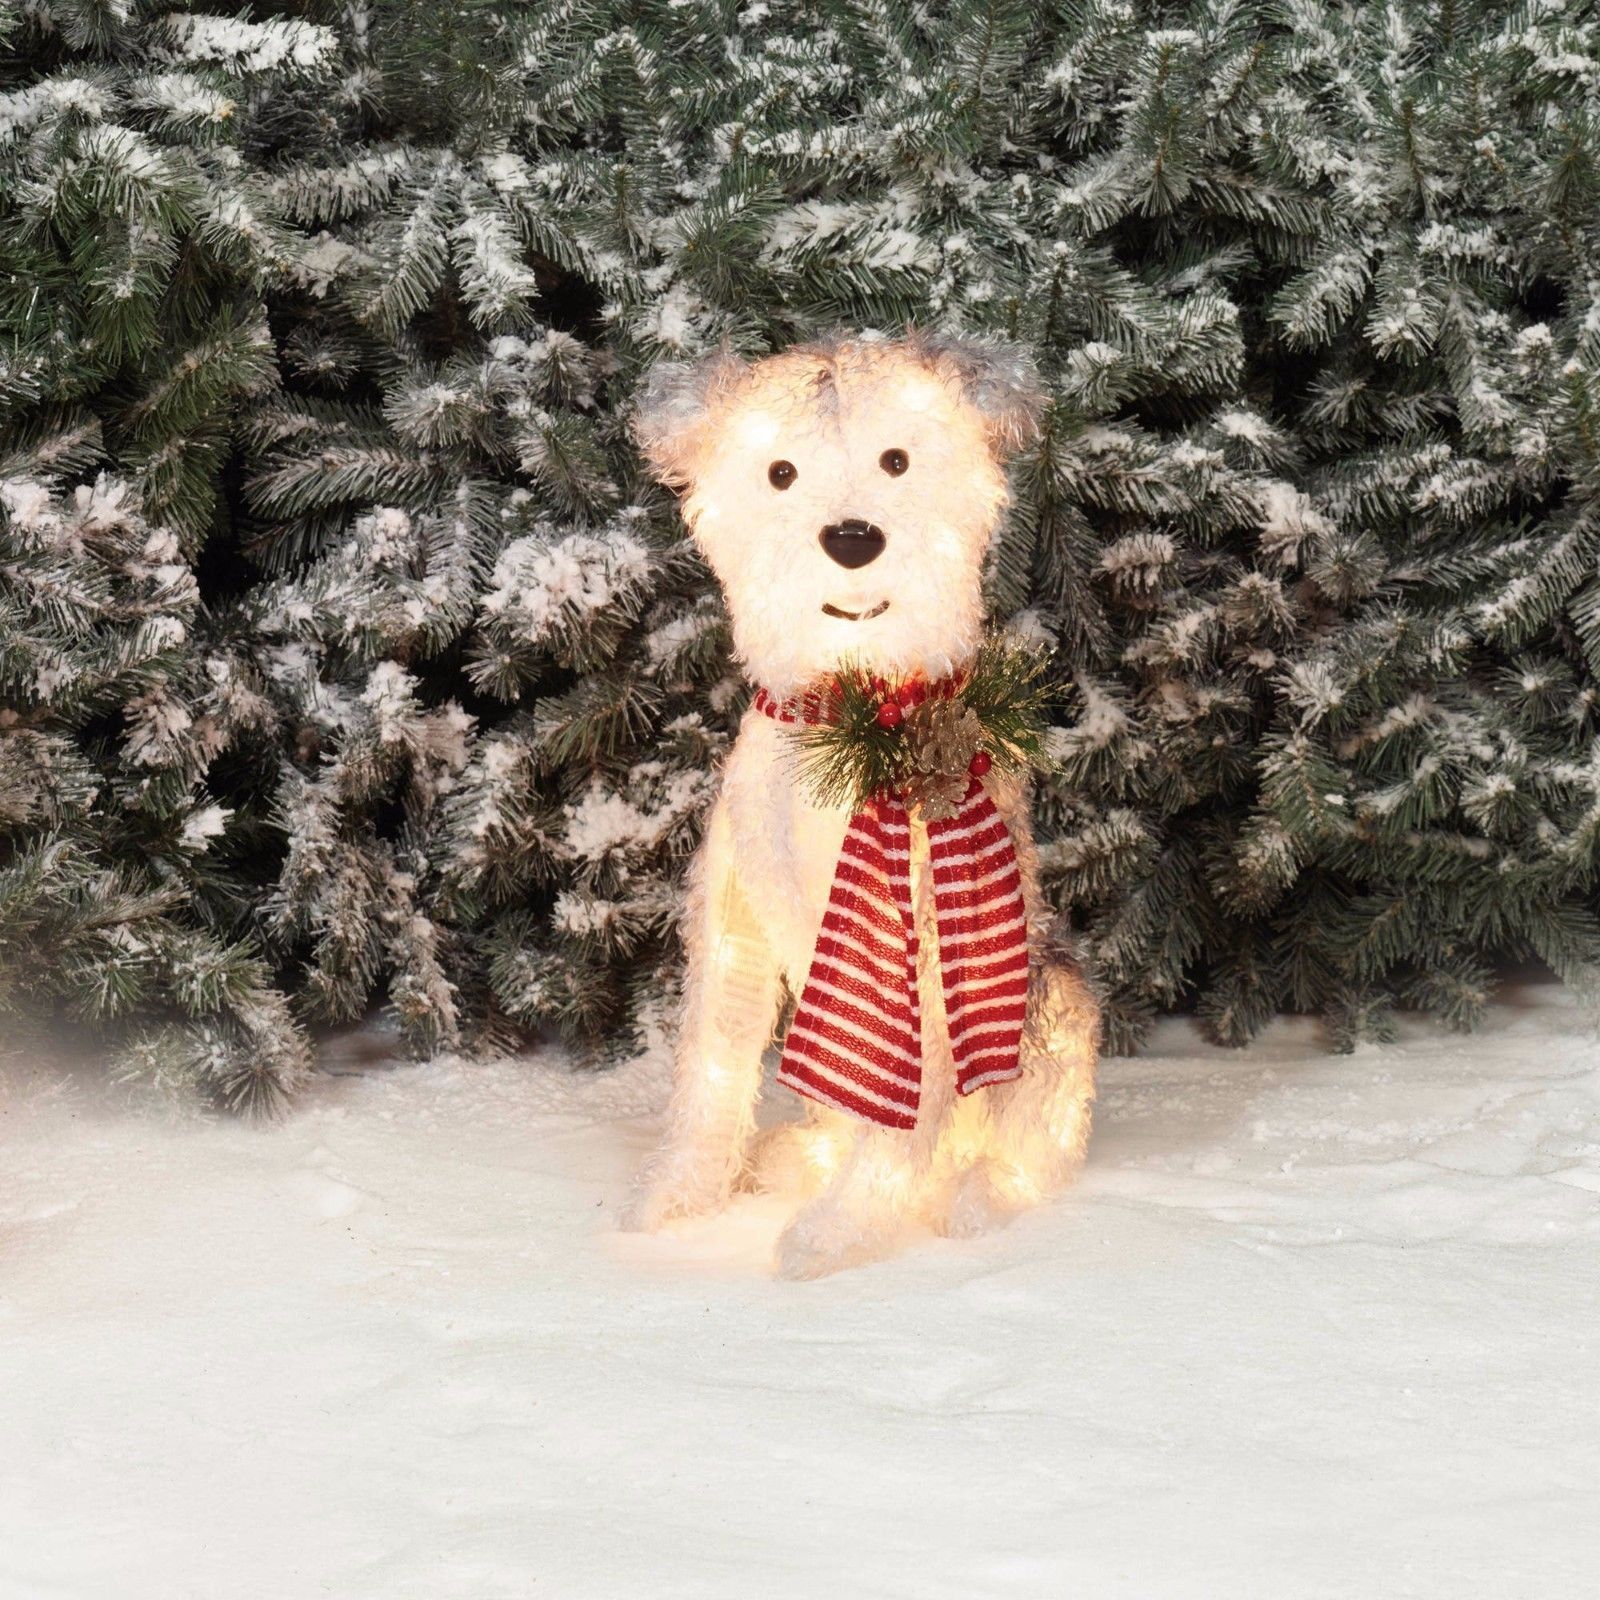 Outdoor Lighted Dog Christmas Decorations
 Christmas Dog Tinsel Sculpture Holiday Decoration Outdoor